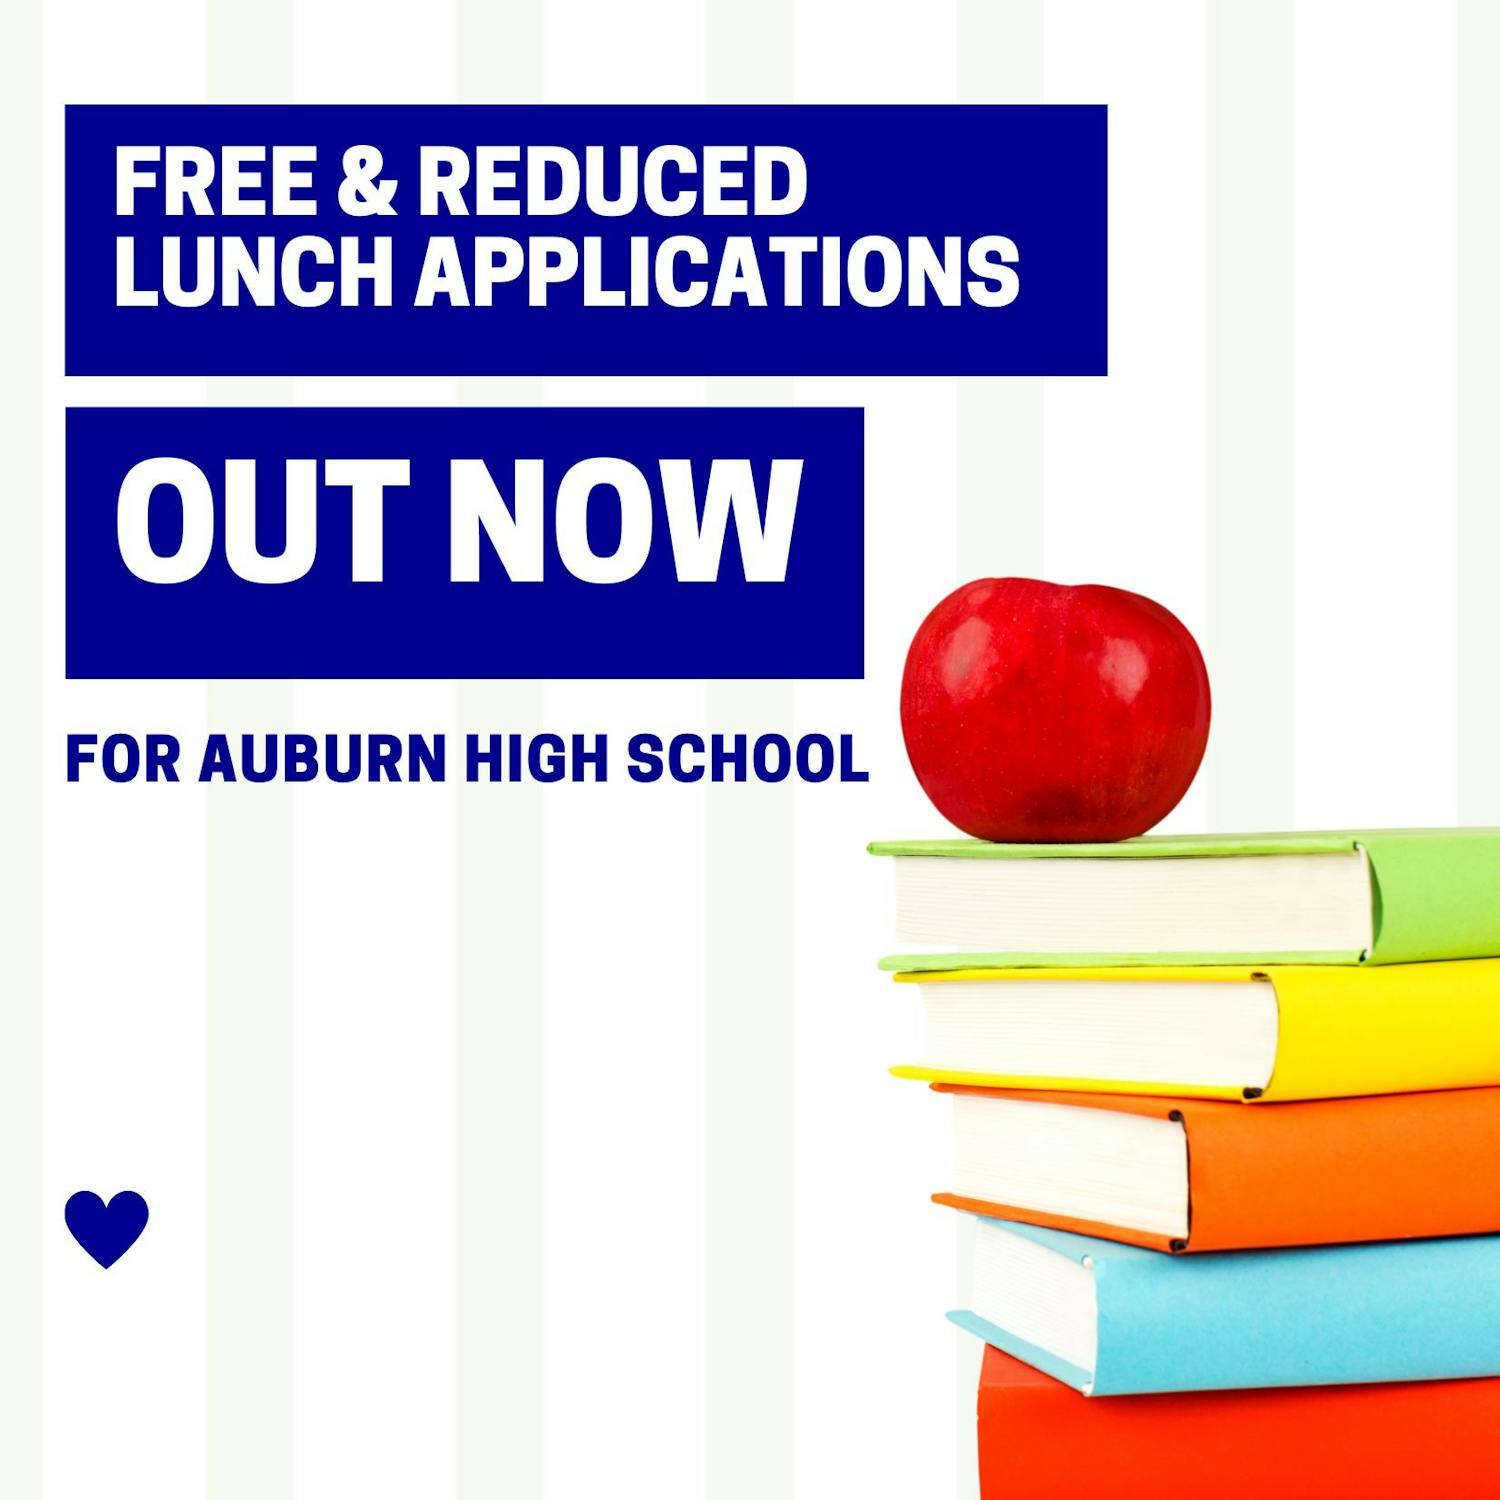 FREE AND REDUCED LUNCH APP